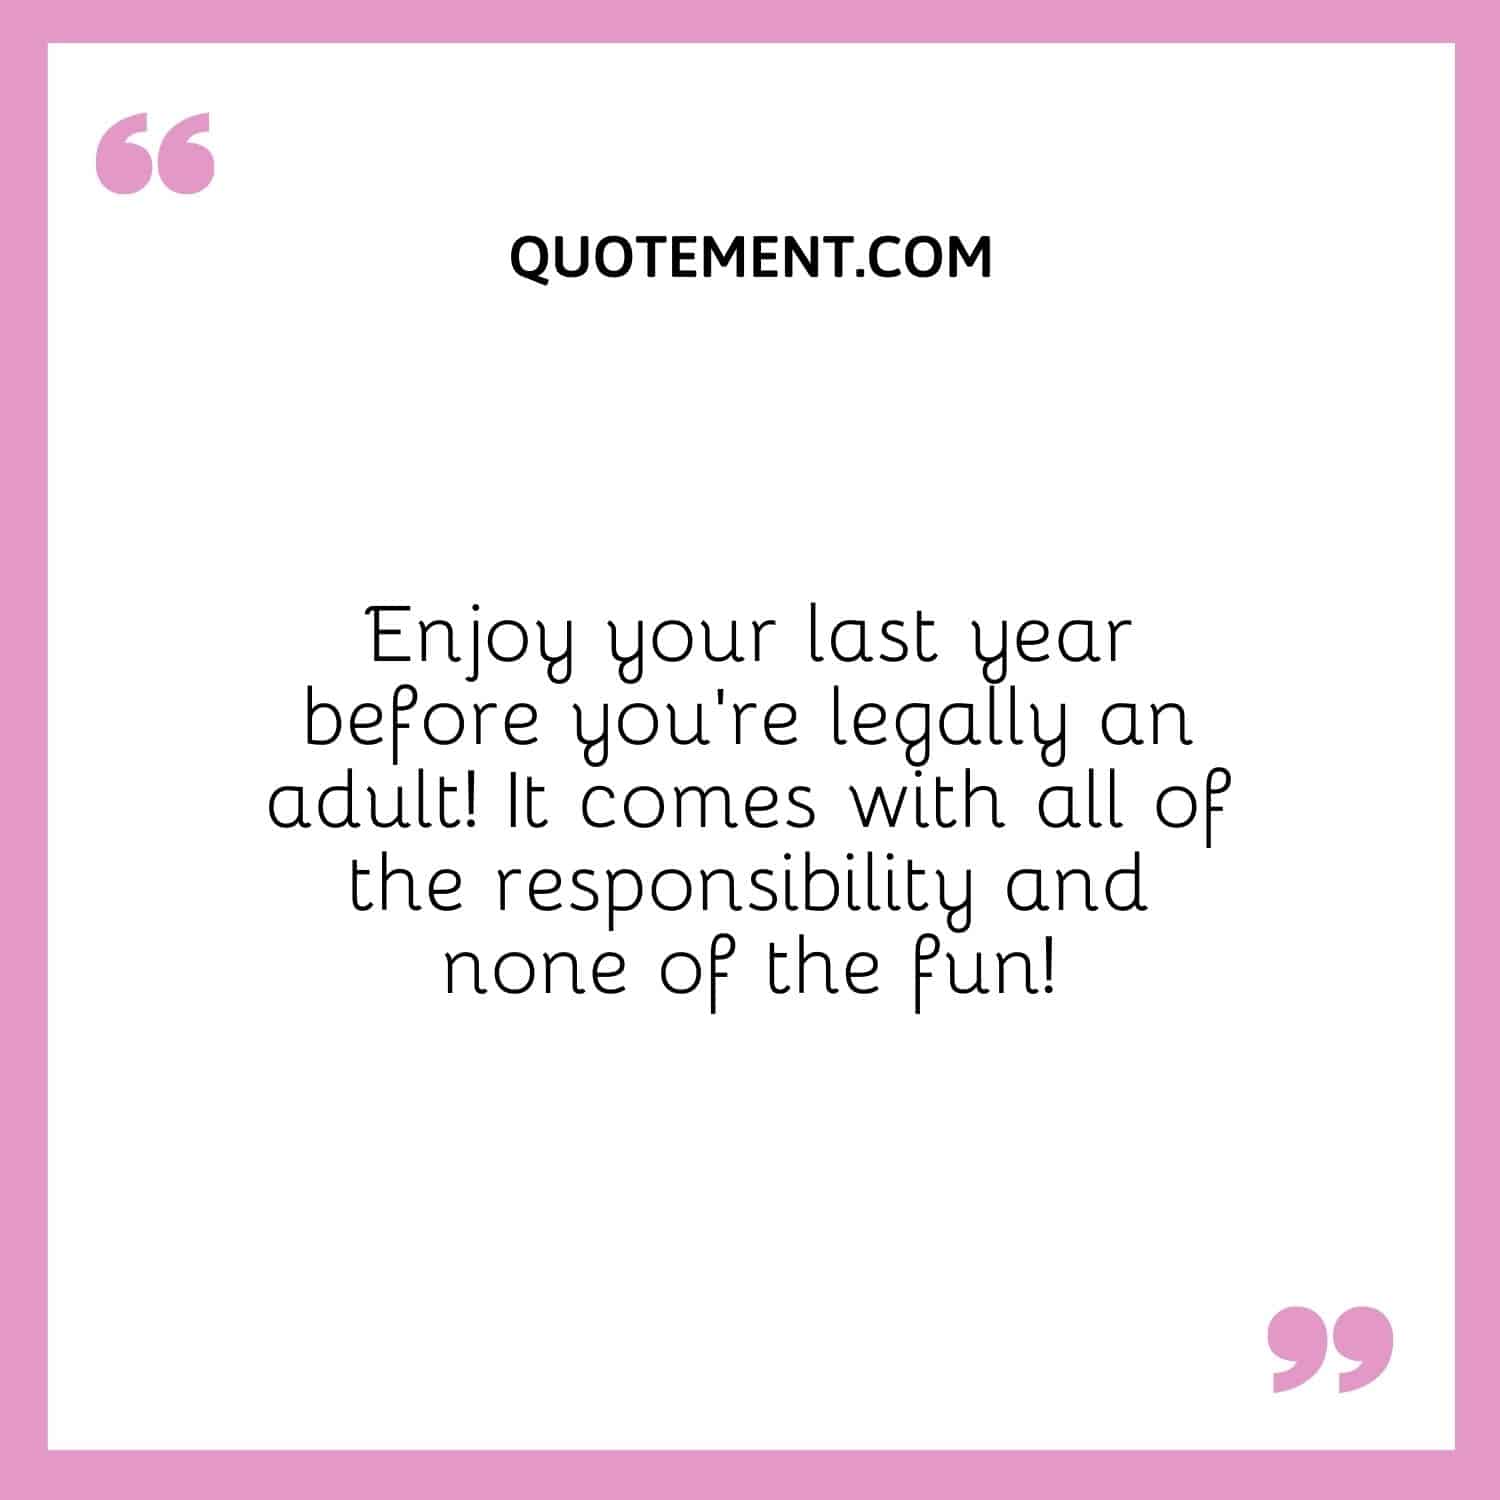 Enjoy your last year before you’re legally an adult